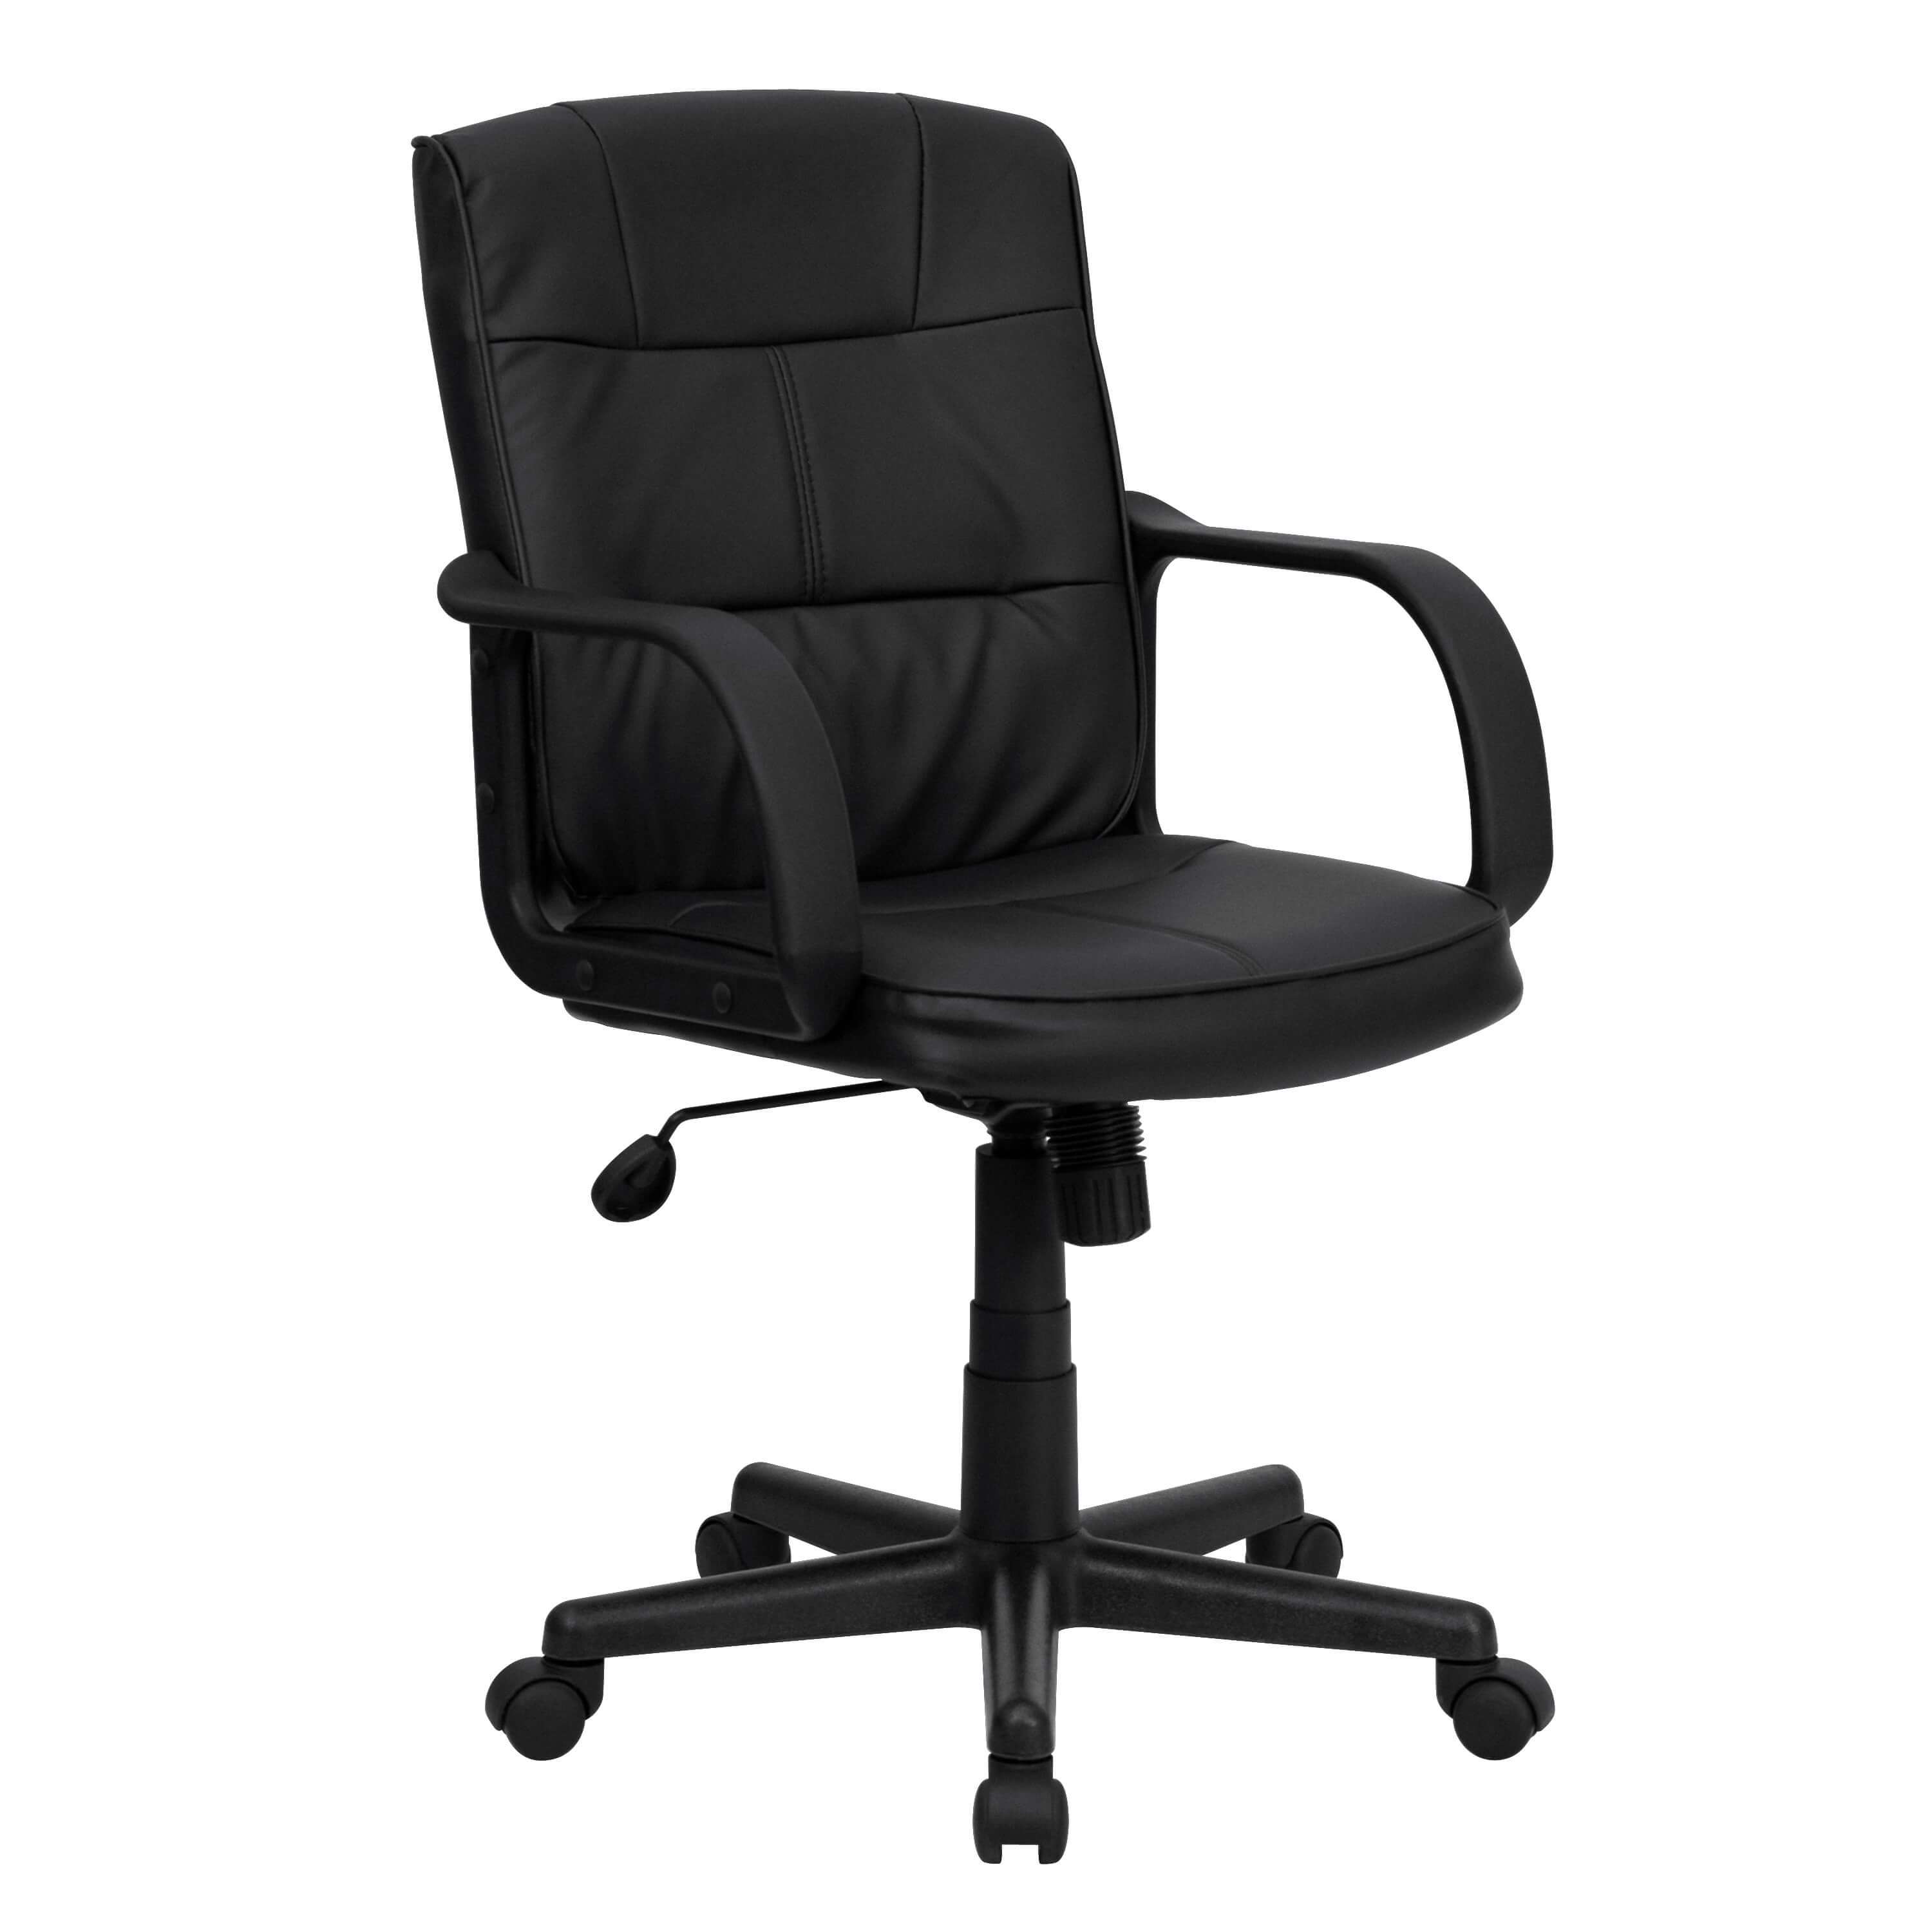 cool-office-chairs-black-leather-office-chair.jpg